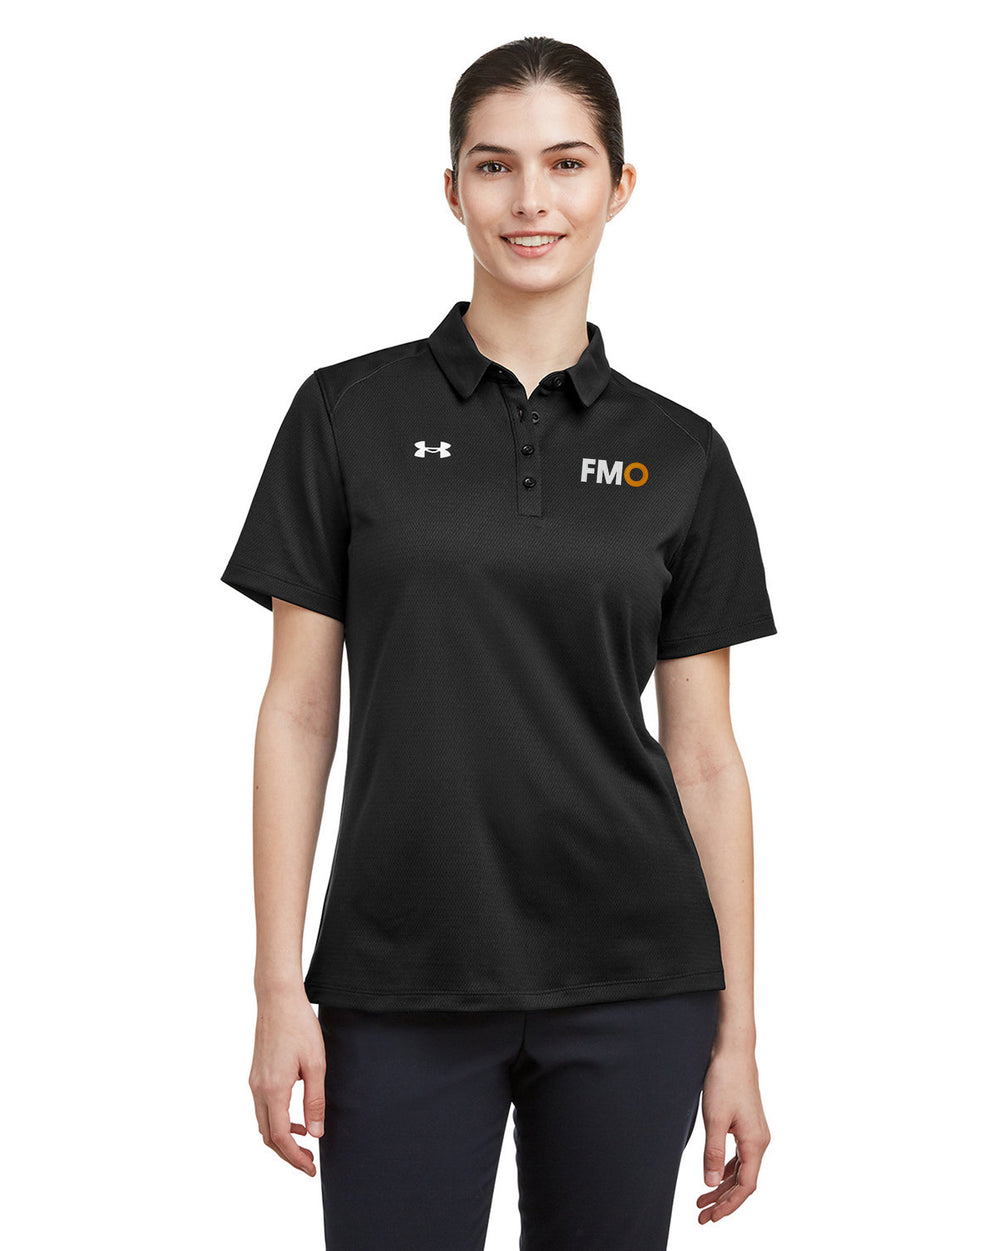 FMOK Outlet - Under Armour Ladies' Tech Polo - 1370431